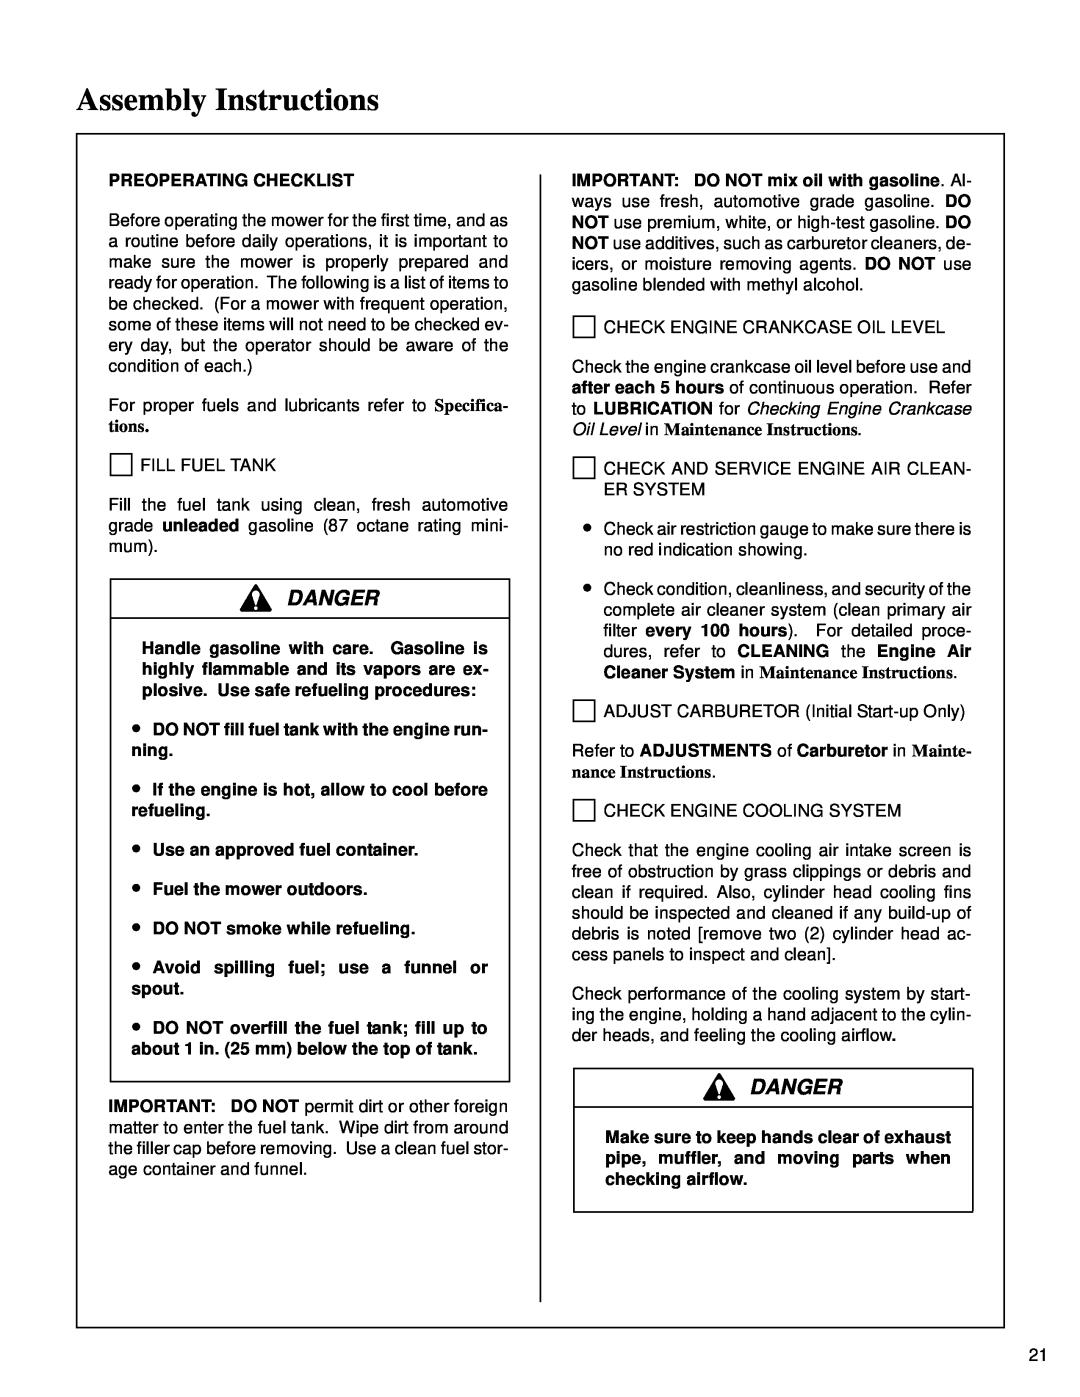 Walker MT Assembly Instructions, Danger, Preoperating Checklist, ∙ DO NOT fill fuel tank with the engine run- ning 